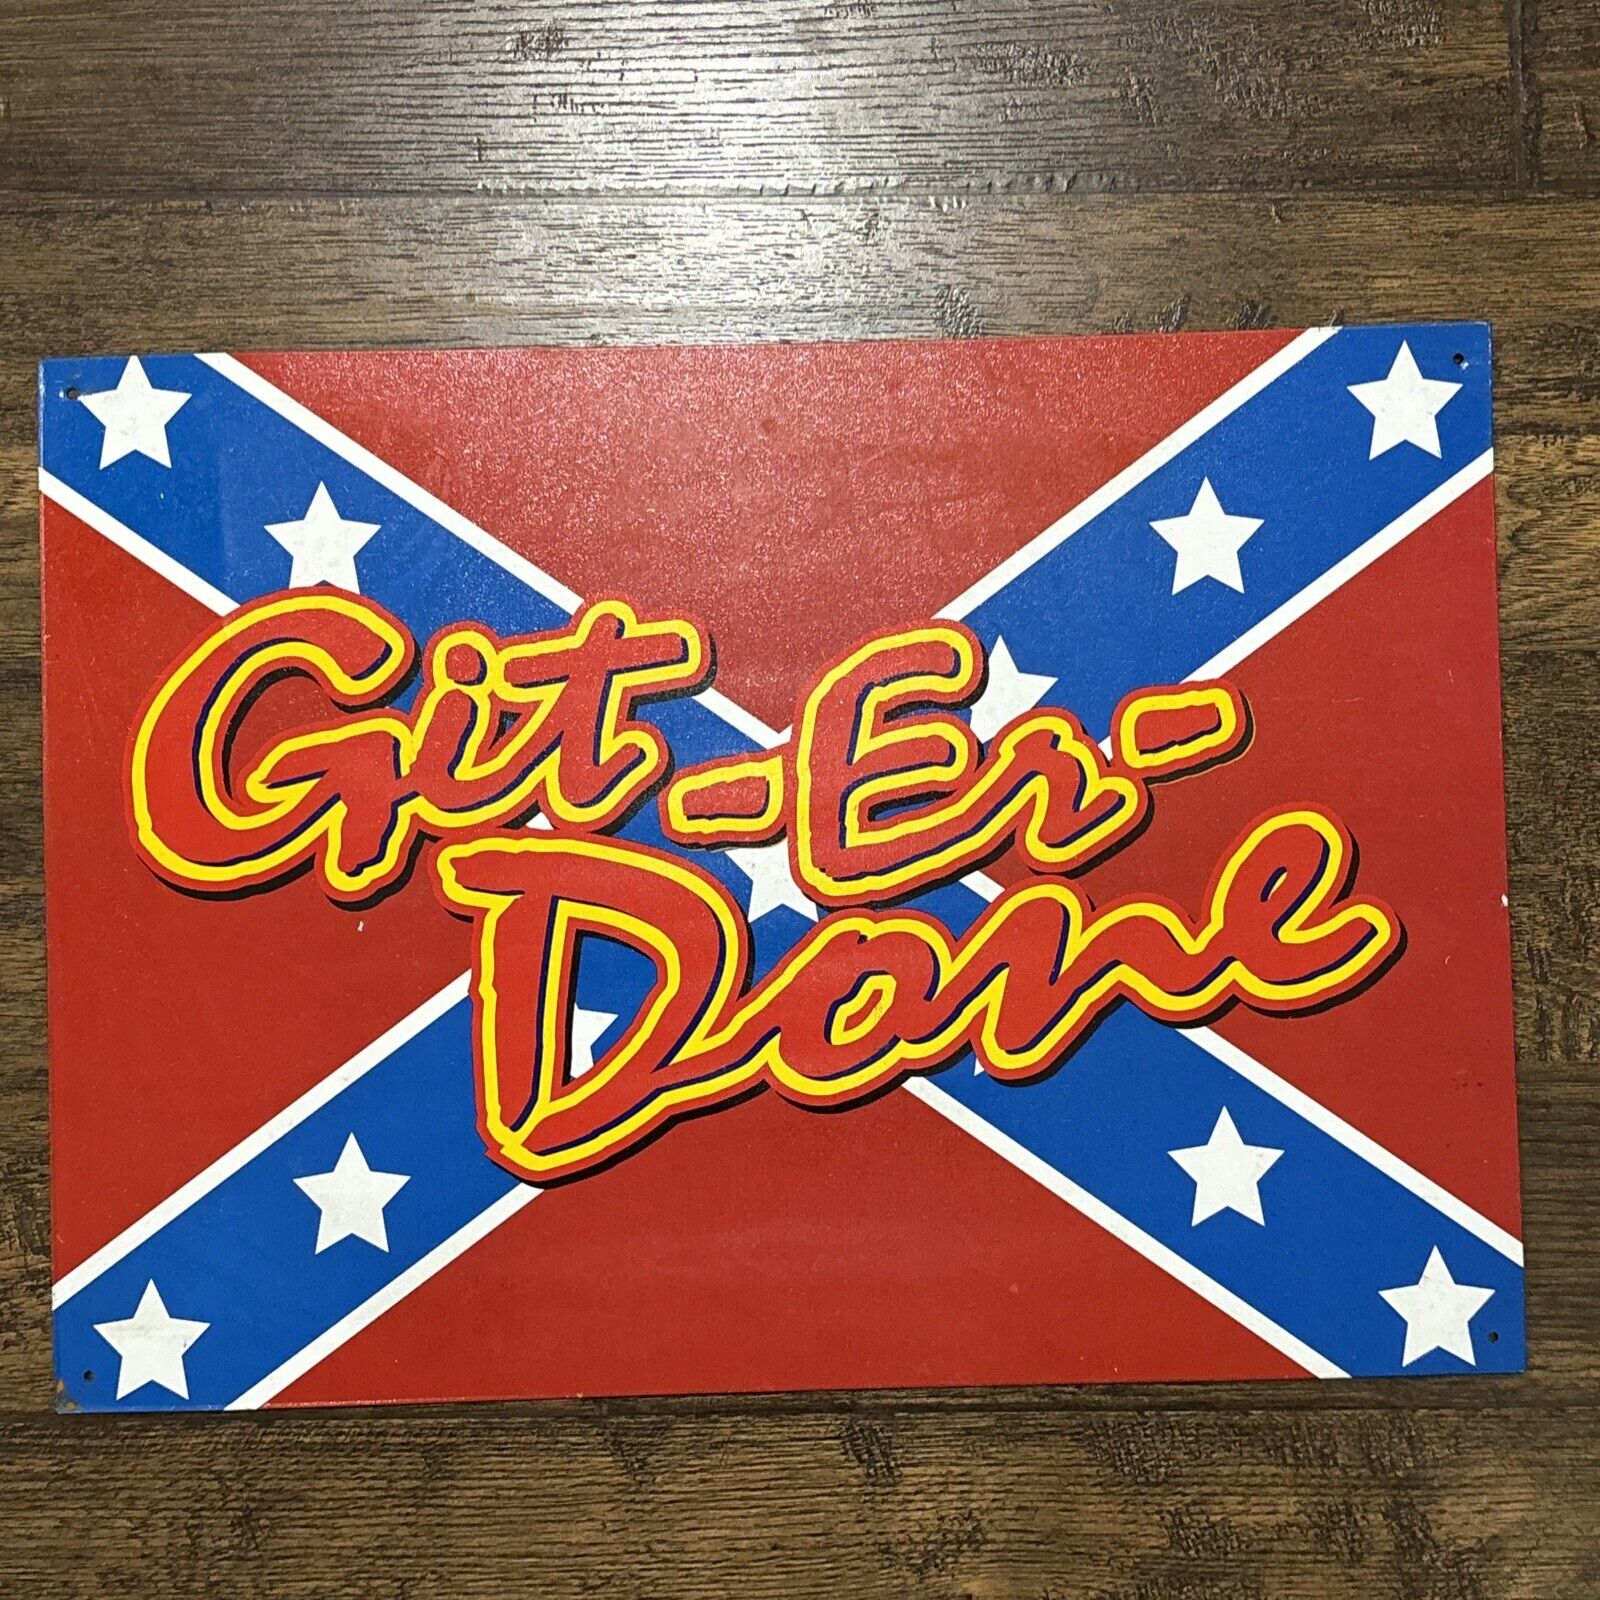 Vintage 2004 GIT-ER-DONE Metal Sign (17 x 12 in) Larry the Cable Guy Made in USA